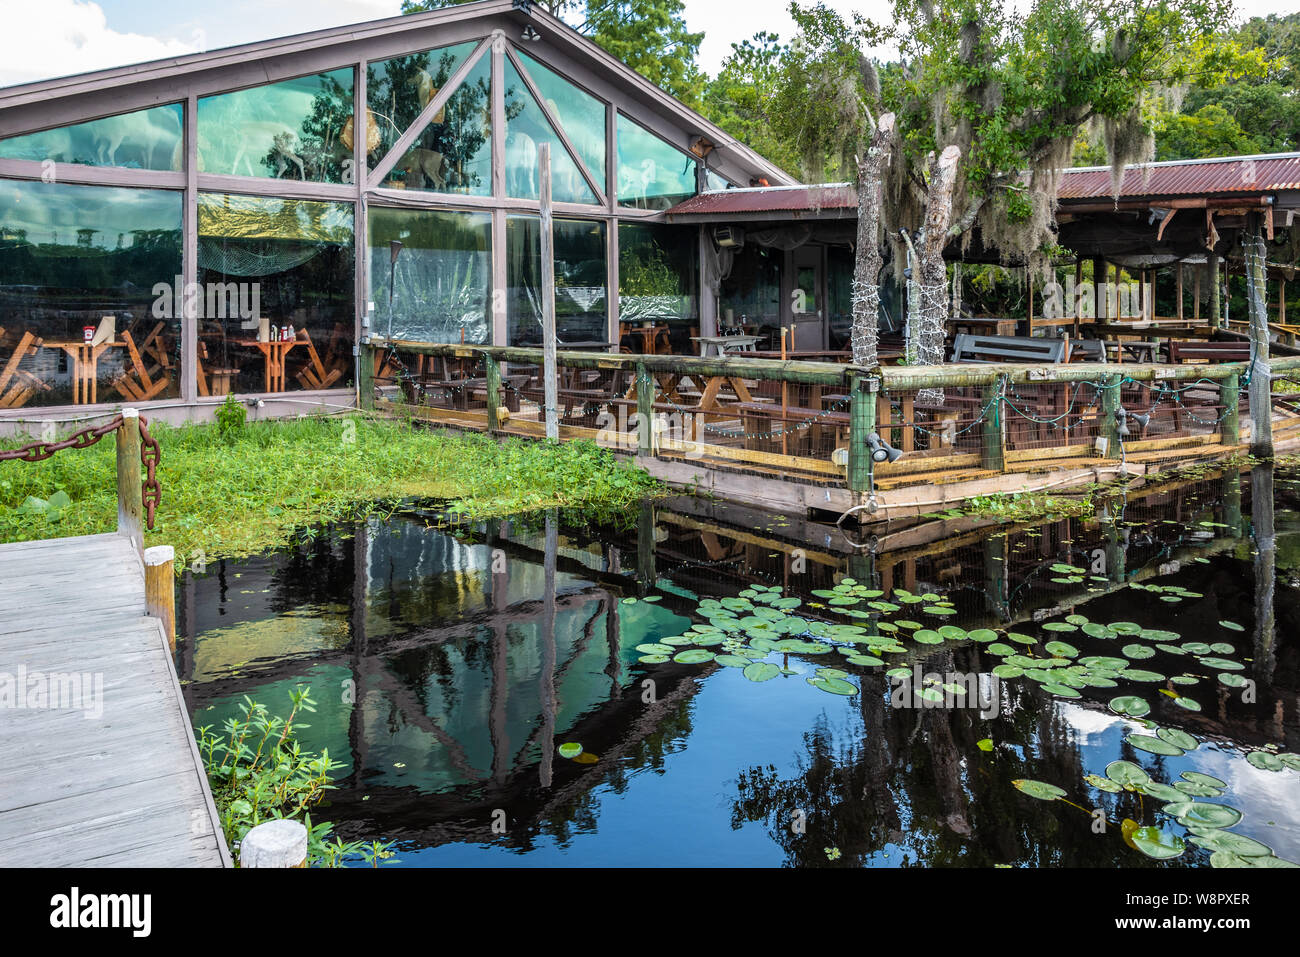 Clark's Fish Camp offers a unique dining experience on Julington Creek in Jacksonville, FL with the largest private taxidermy collection in the US. Stock Photo